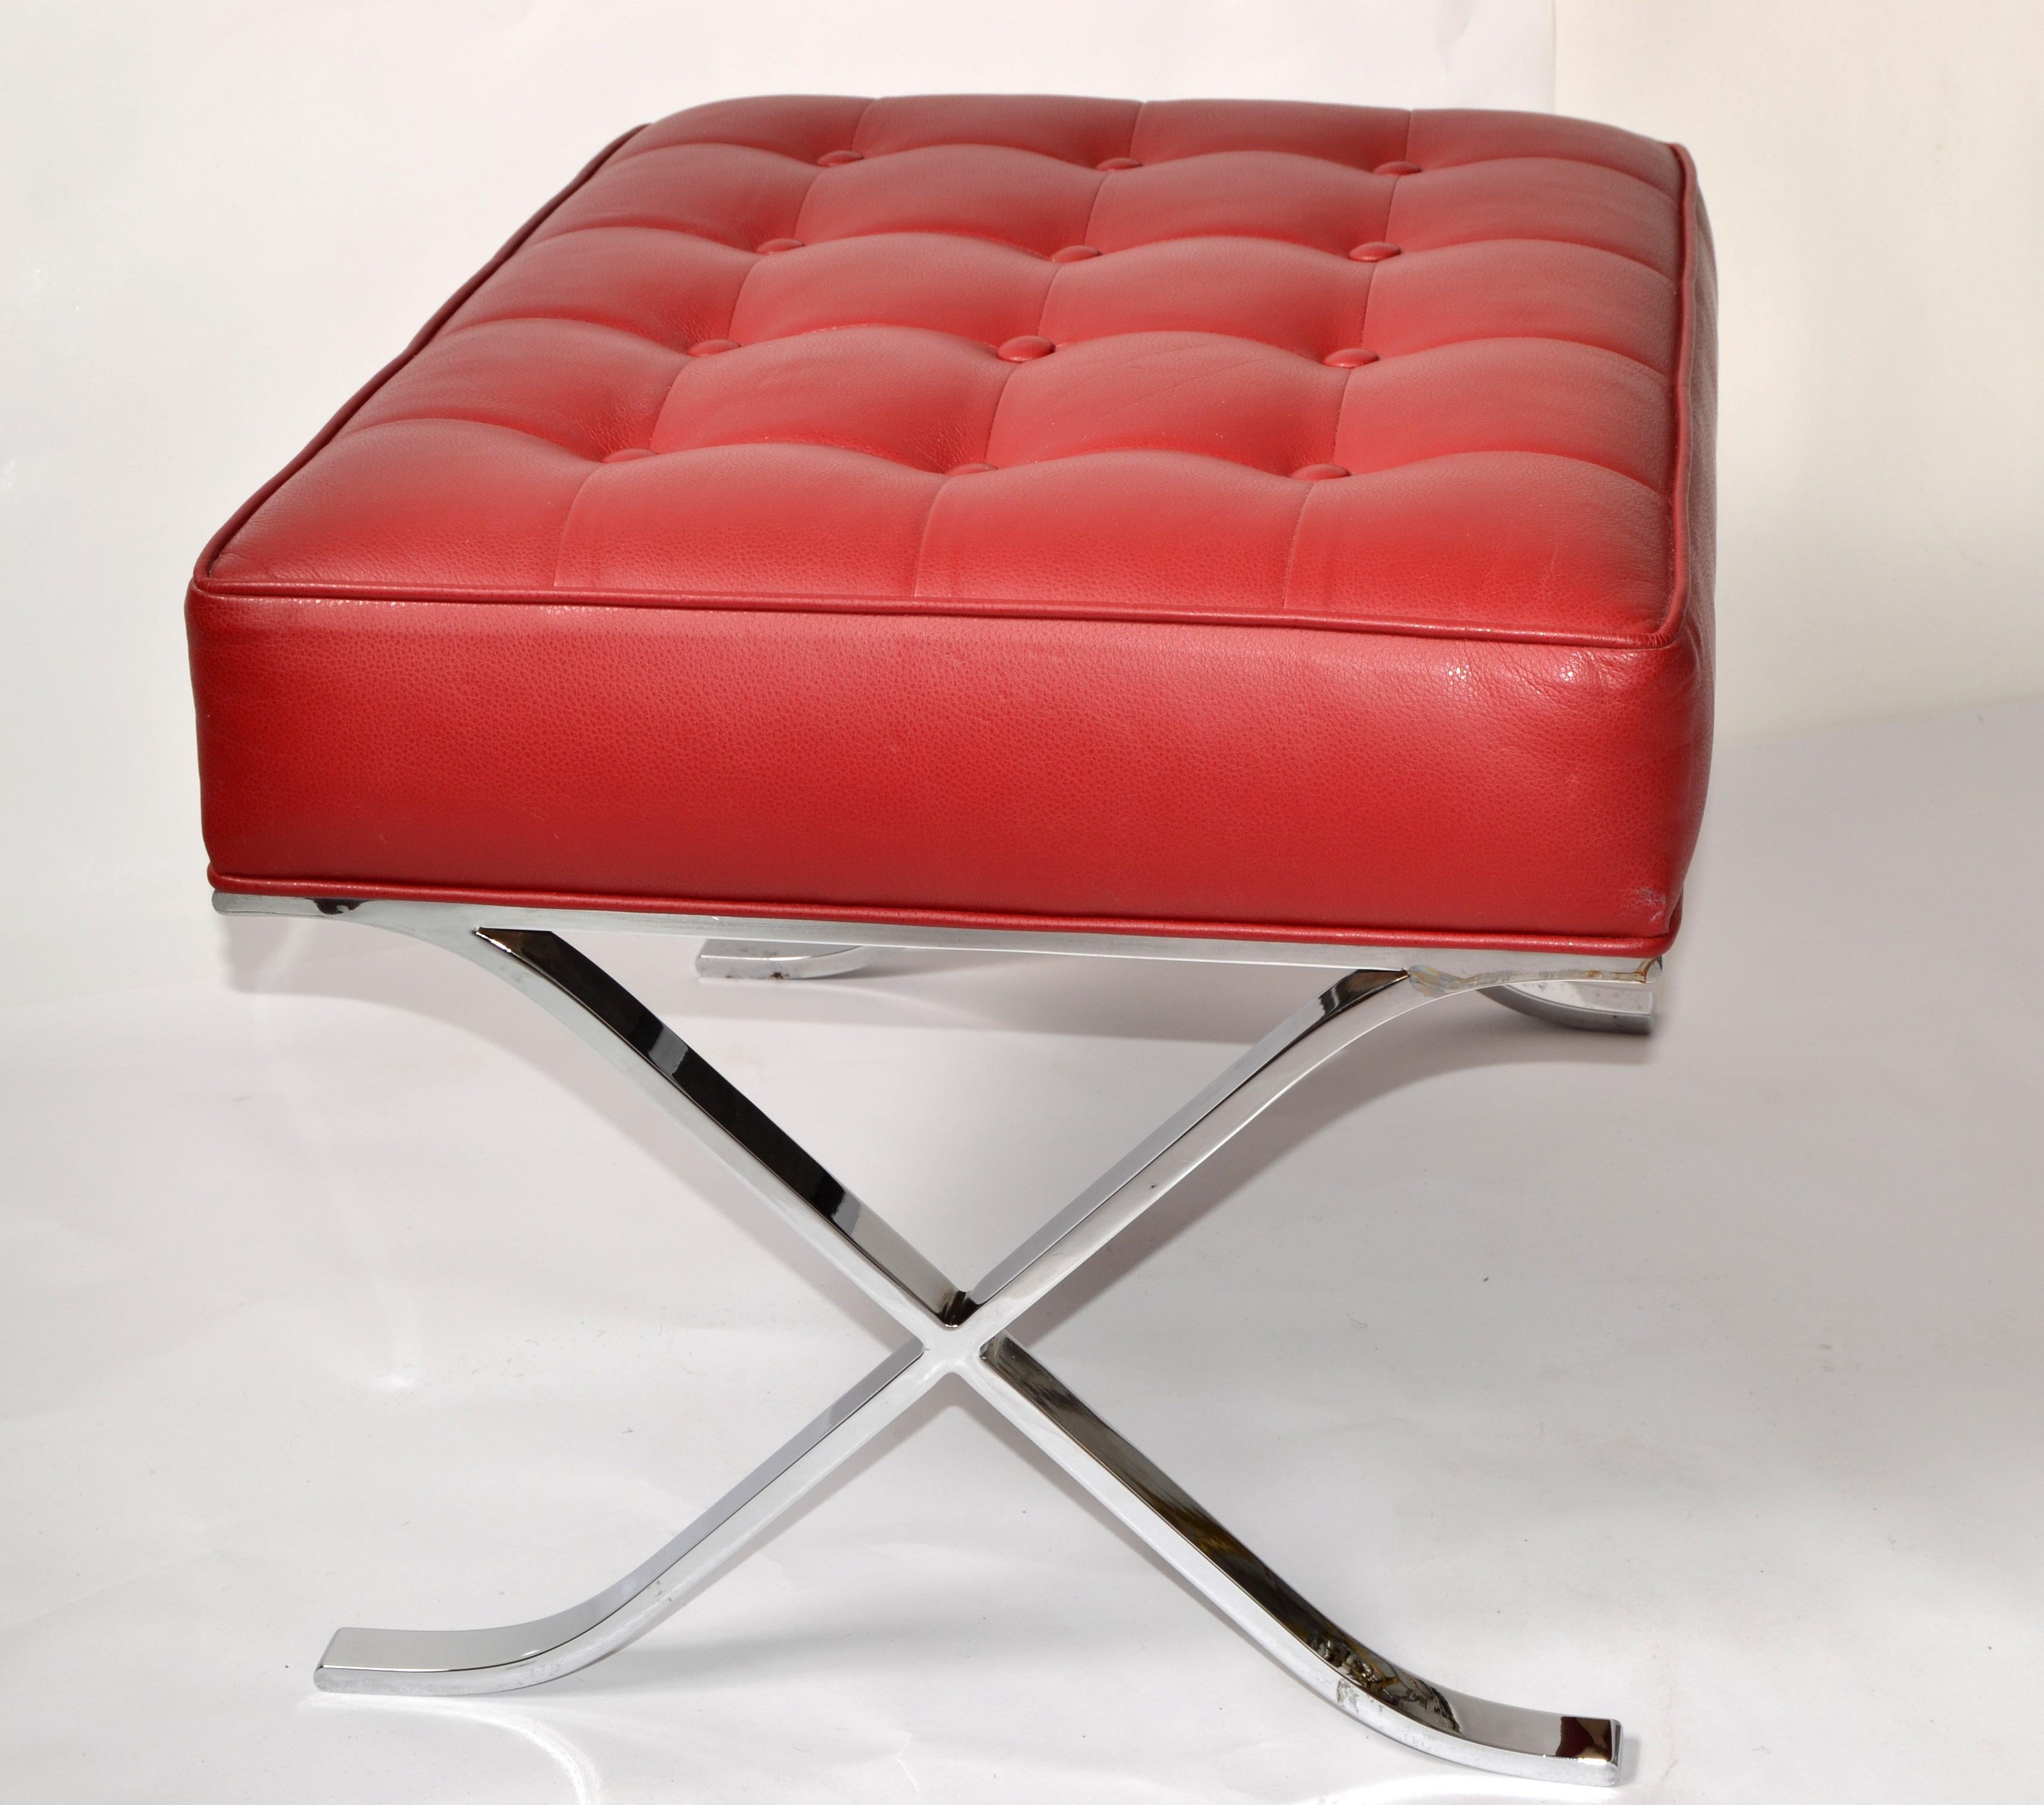 Mies Van Der Rohe Style Barcelona Chromed Steel Red Vinyl Ottoman Footstool 1980 For Sale 1